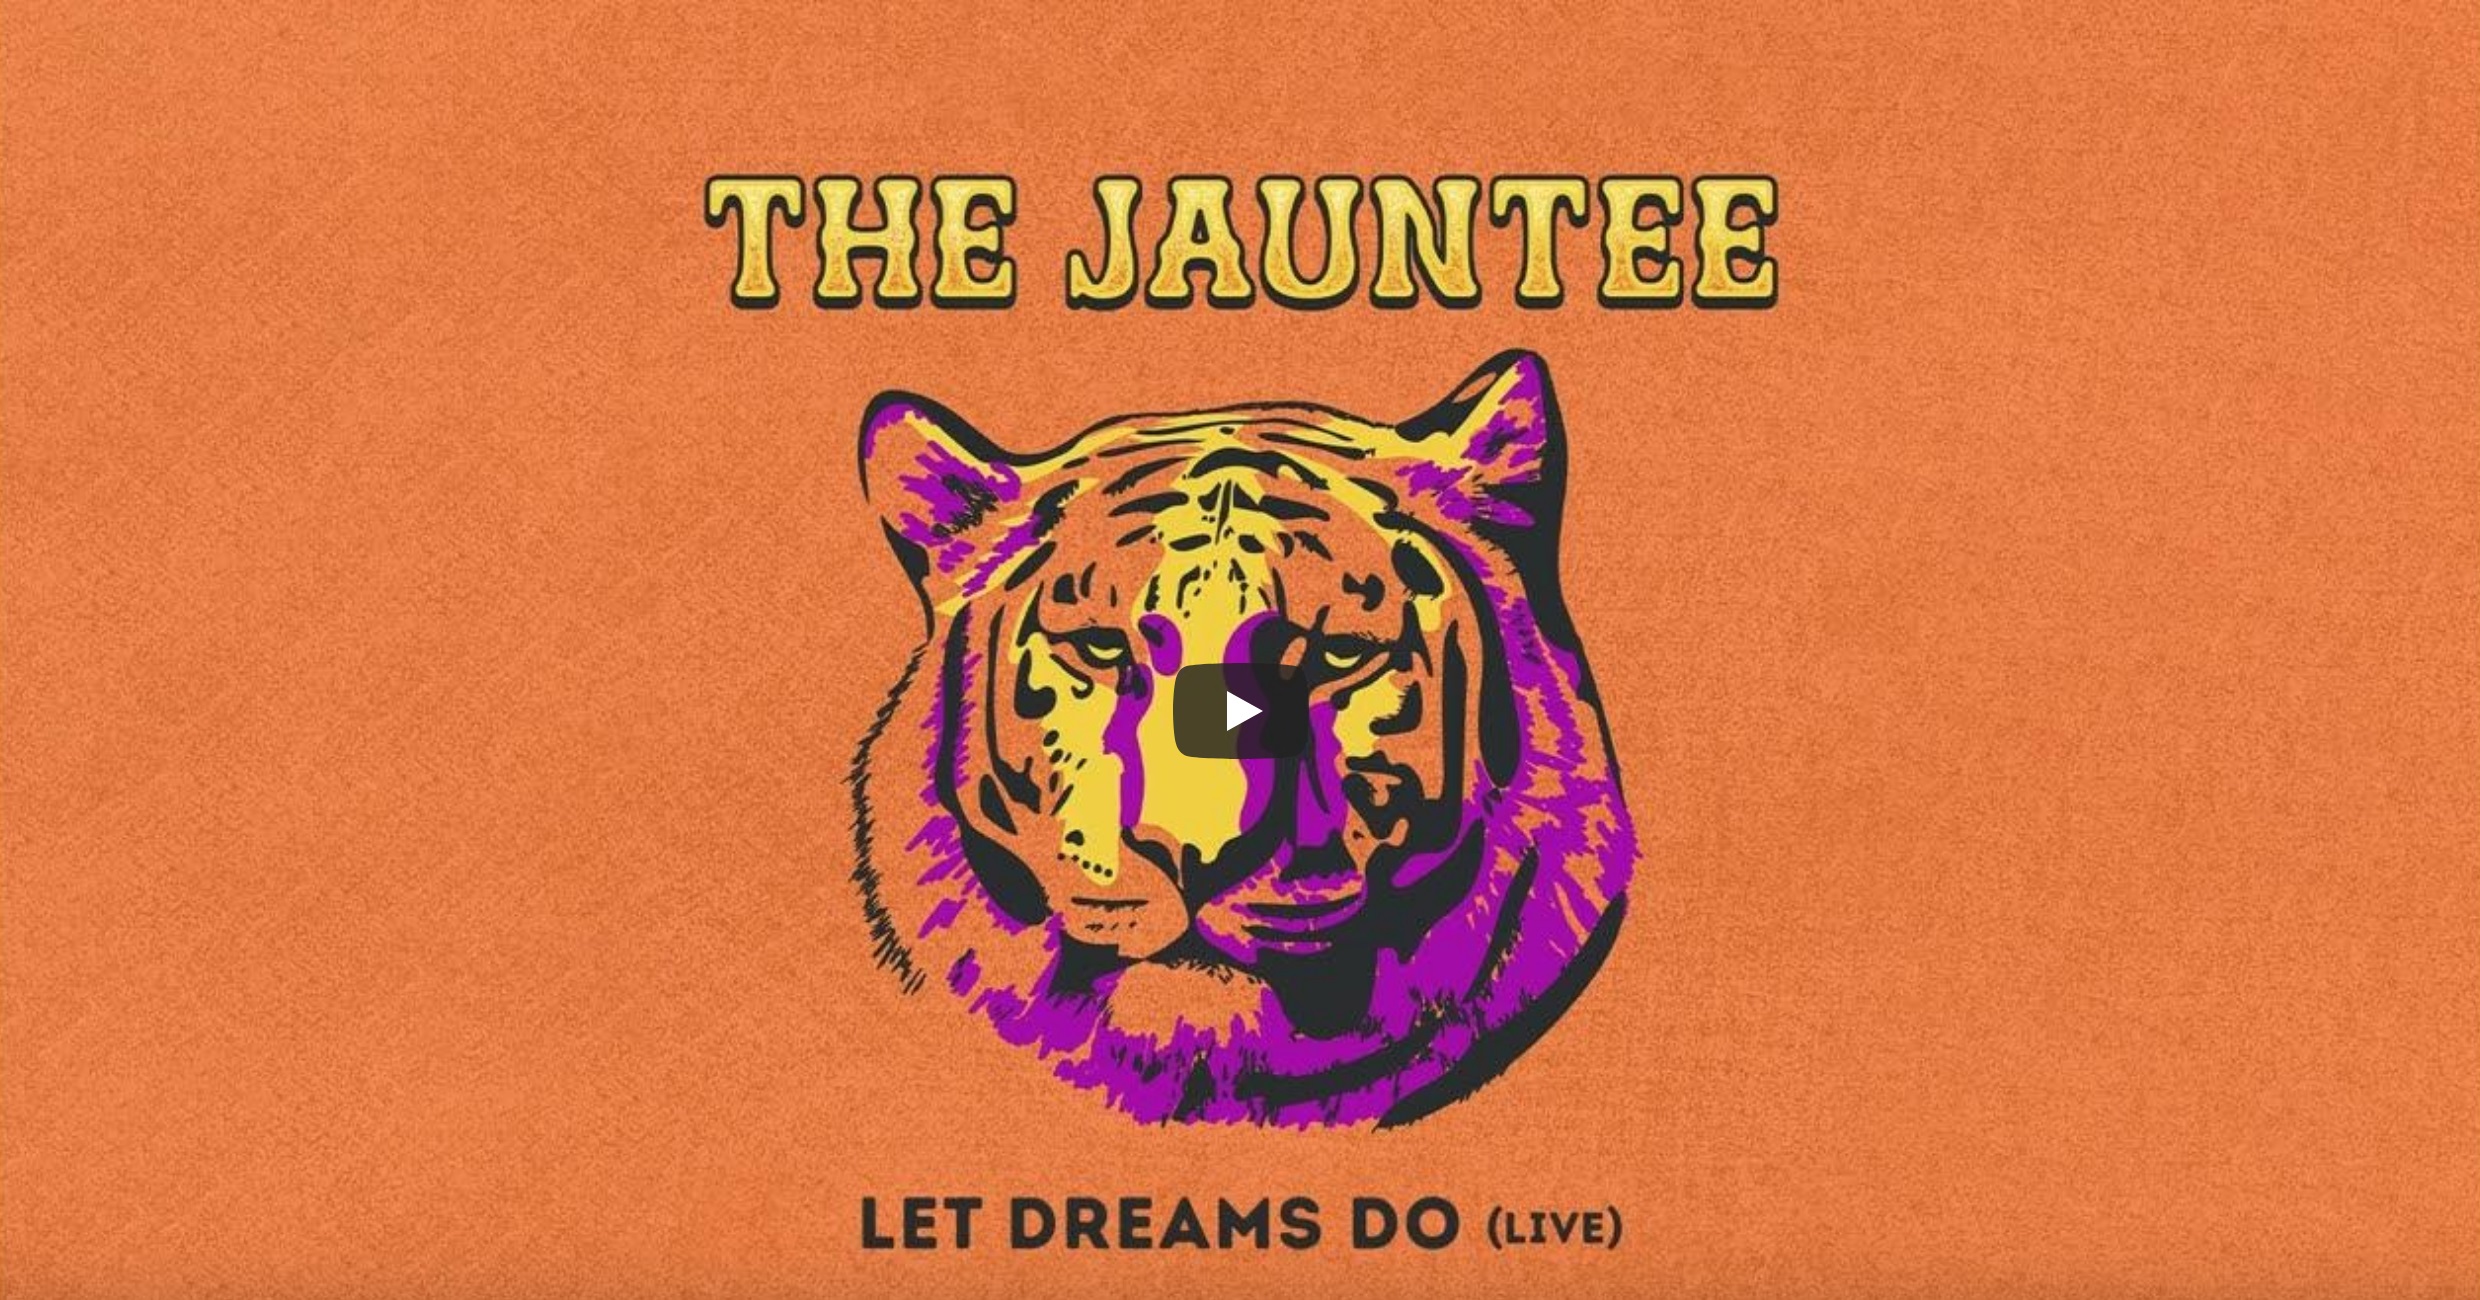 THE JAUNTEE RELEASE NEW SINGLE "LET DREAMS DO" FROM UPCOMING LIVE ALBUM "JAUNTS OF OUR LIVES VOL. 3"